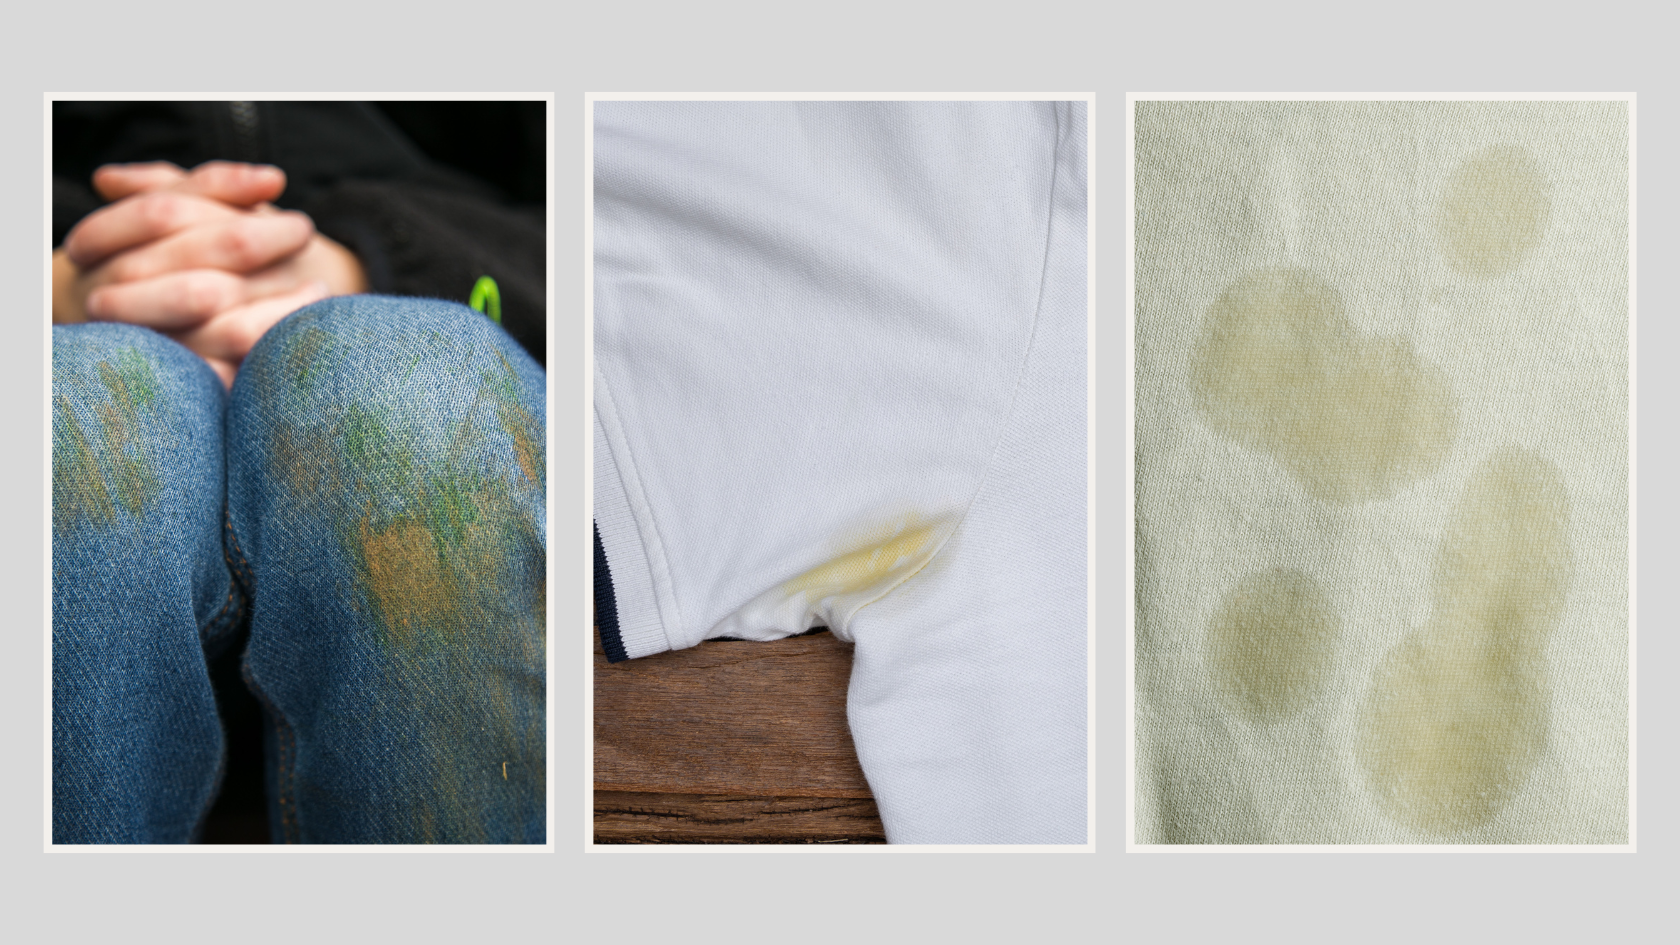 Images of a grass stain, sweat stain, and grease stain on clothing